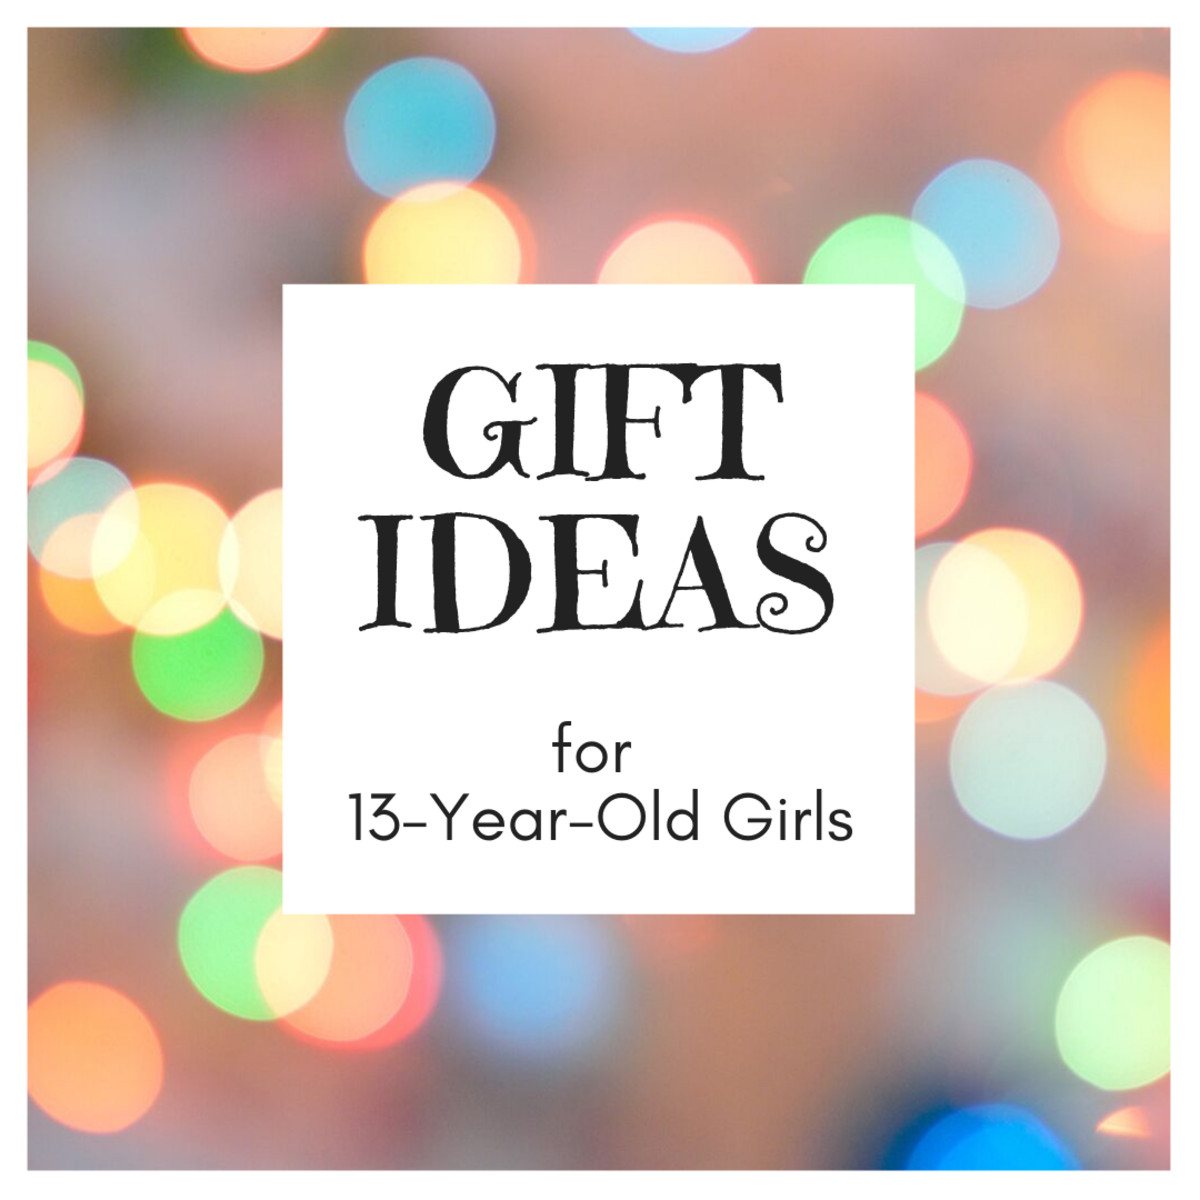 Gift Ideas For 13 Year Old Girls
 Best Gift Ideas for 13 Year Old Girls